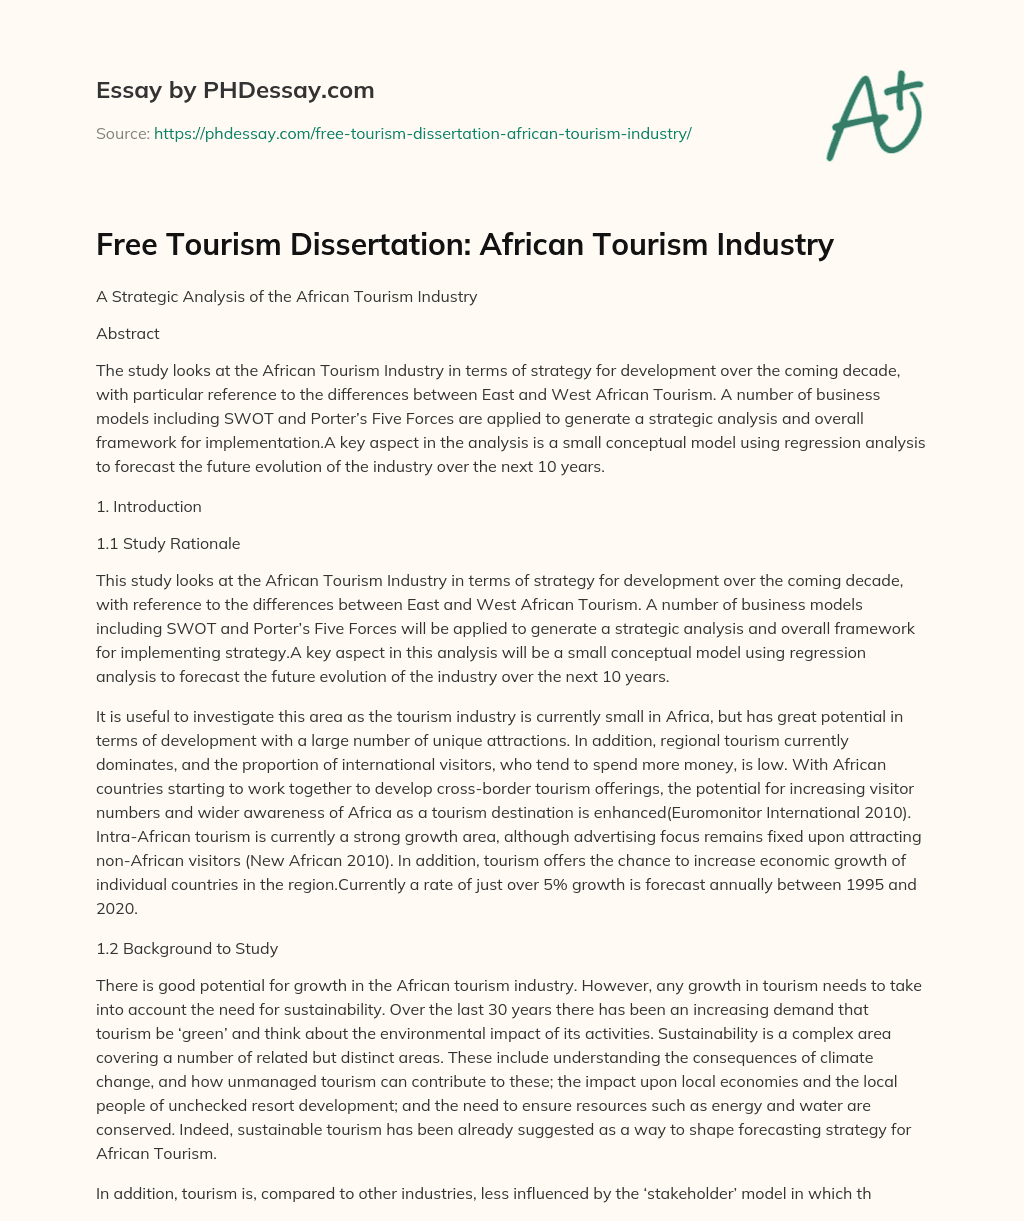 Free Tourism Dissertation: African Tourism Industry essay